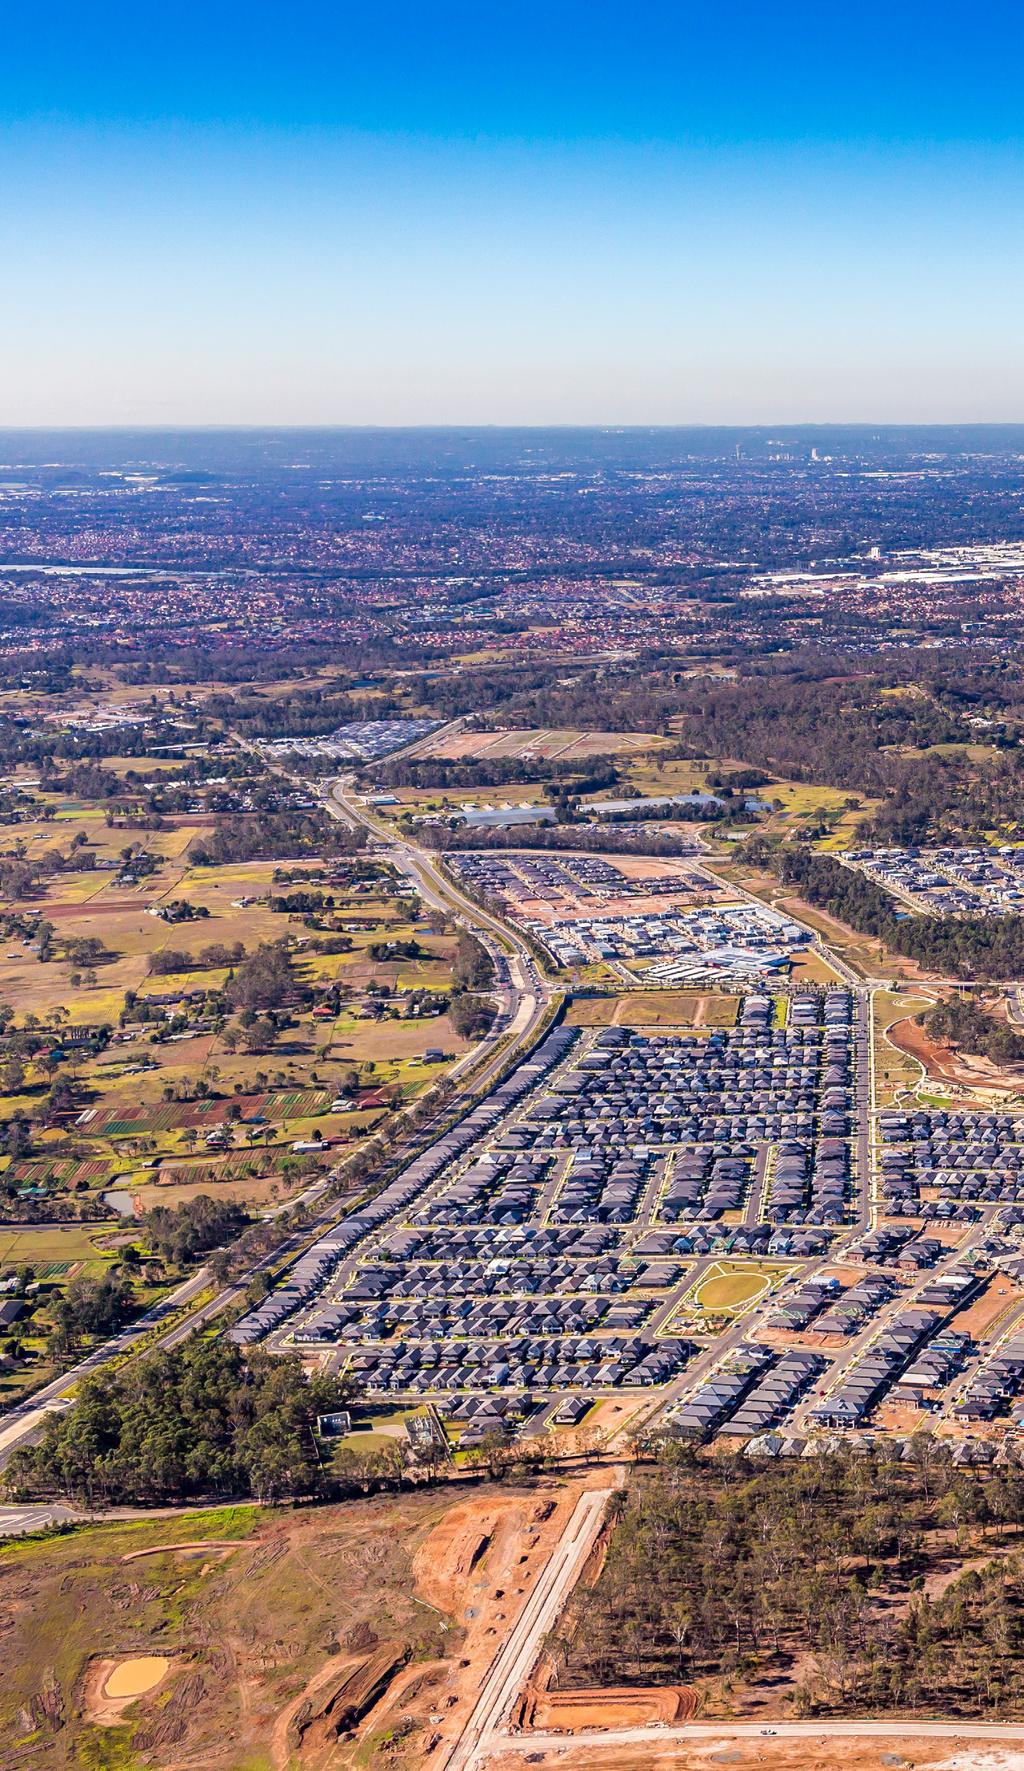 WALKABILITY & ACCESSIBILITY East Leppington is located within South West Sydney, approximately 45km south-west of the Sydney CBD, and forms part of the Campbelltown, Liverpool and Camden Local